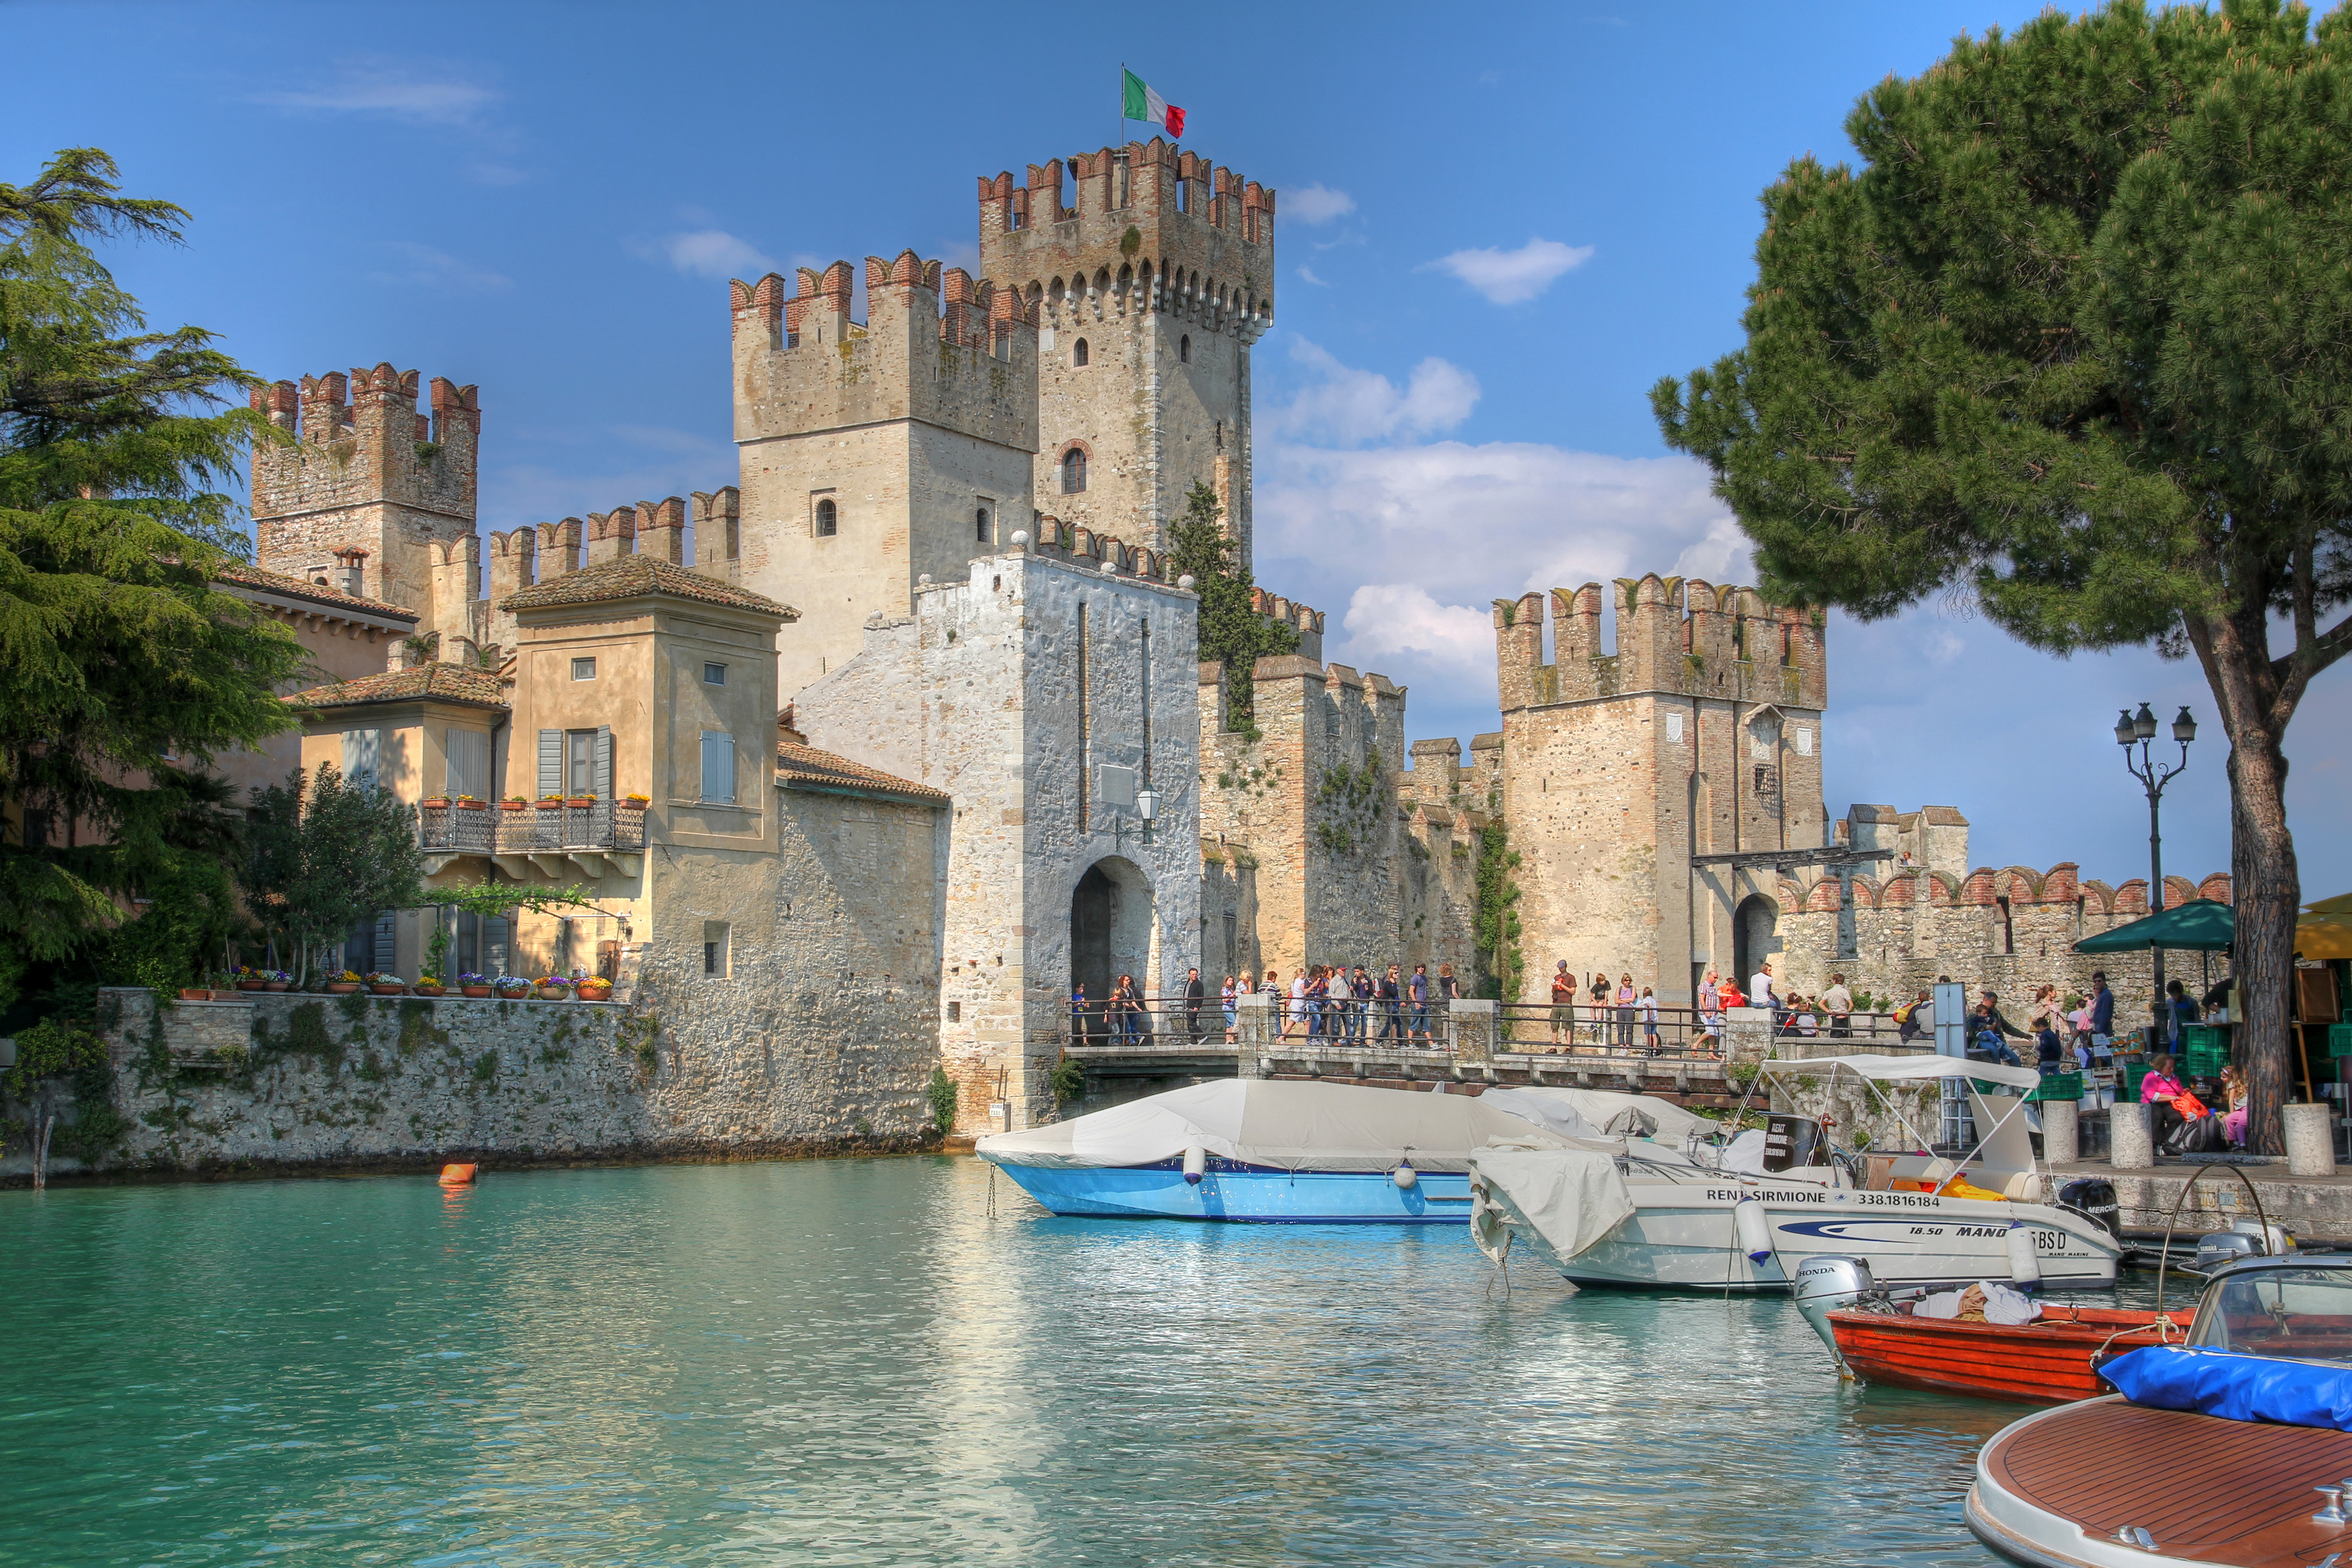 "Sirmione, Italy - April 27th, 2011 - Tourists visiting Scaliger Castle (Castello Scaligero) in Sirmione, on Lake Garda, Italy during spring break."